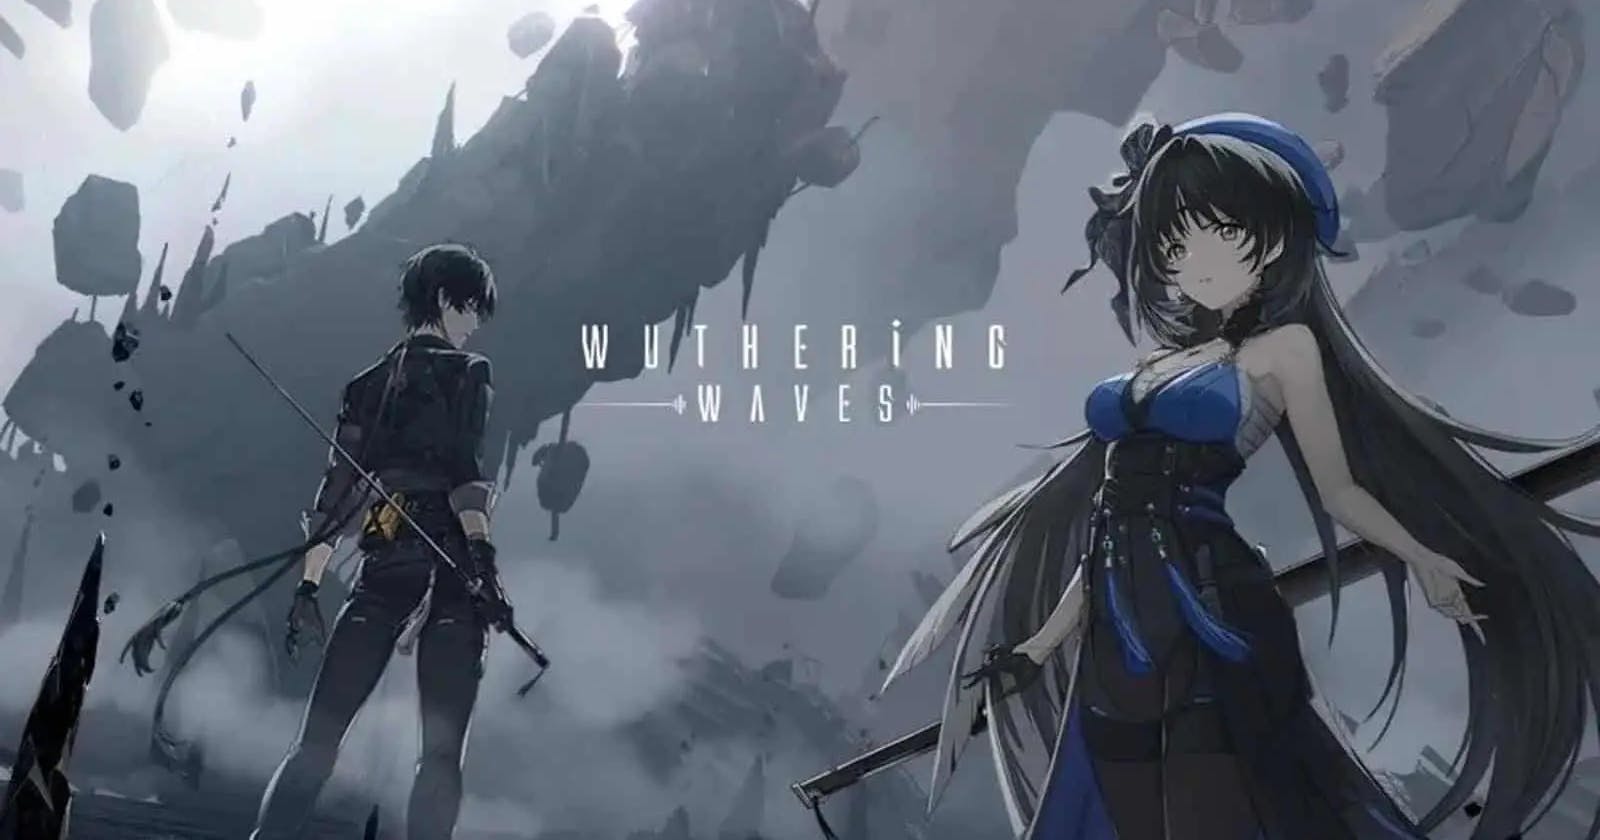 Best Wuthering Waves Tier List